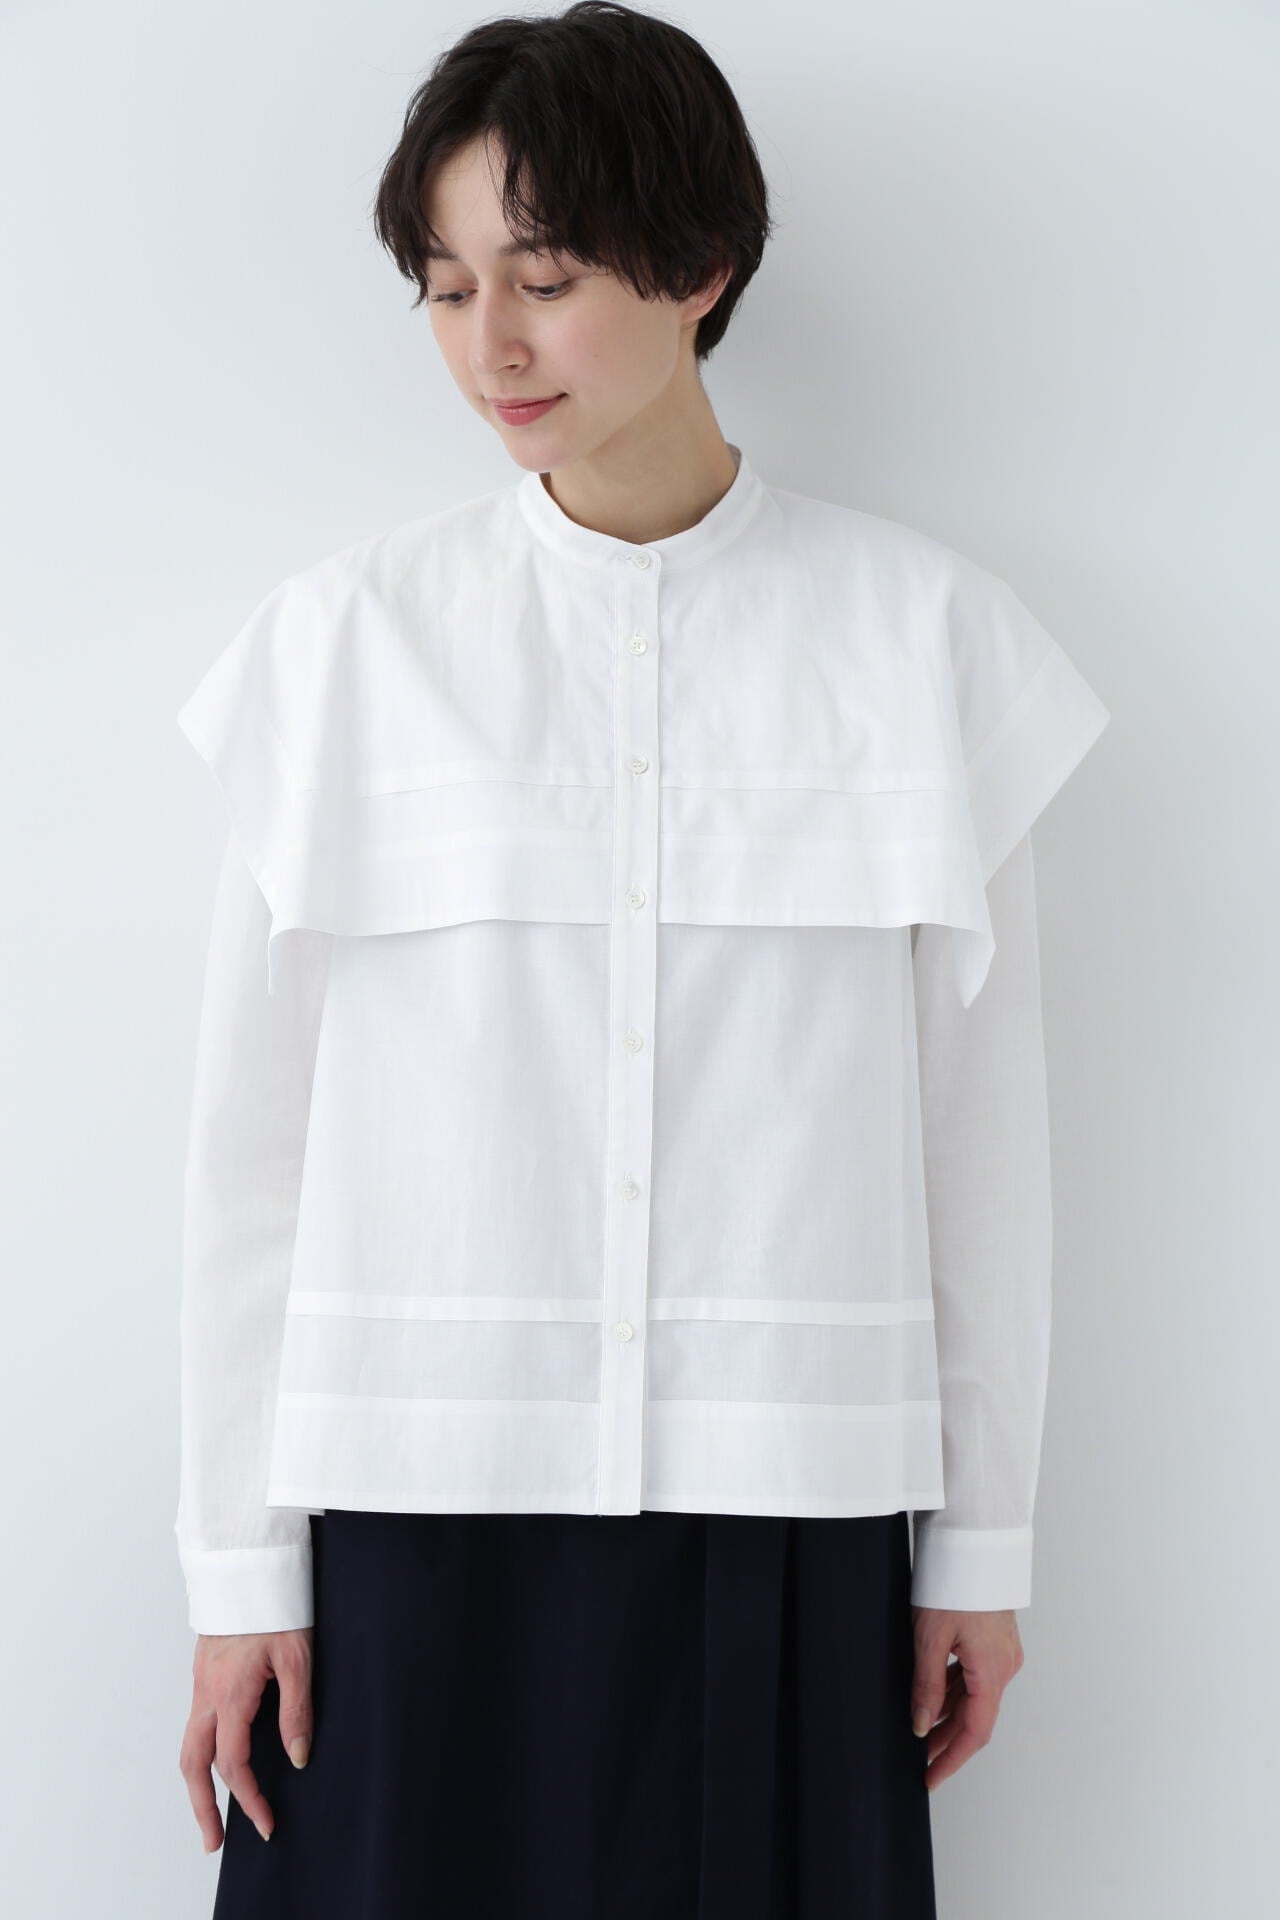 Pachman Mantle Blouse ケープ ブラウス - トップス